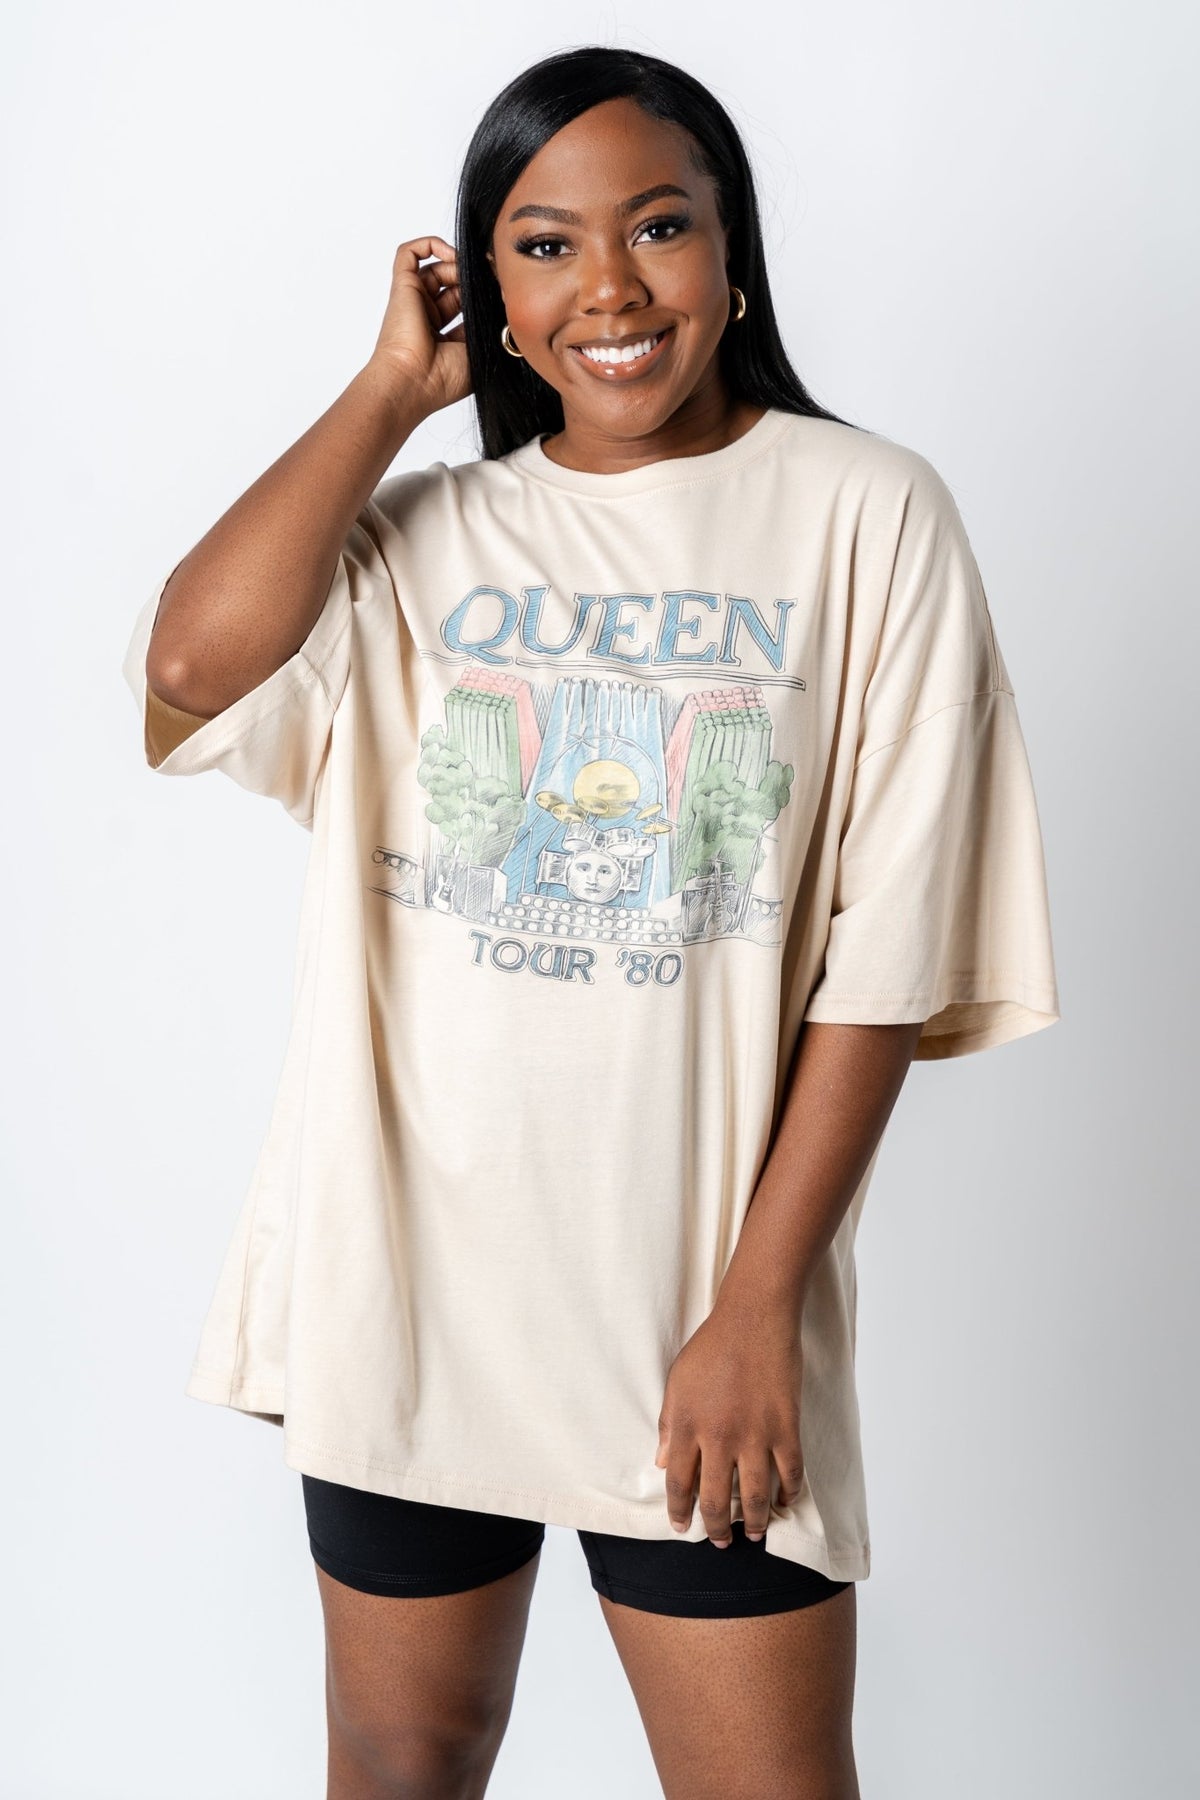 Queen 1980 tour oversized graphic tee off white - Trendy Band T-Shirts and Sweatshirts at Lush Fashion Lounge Boutique in Oklahoma City